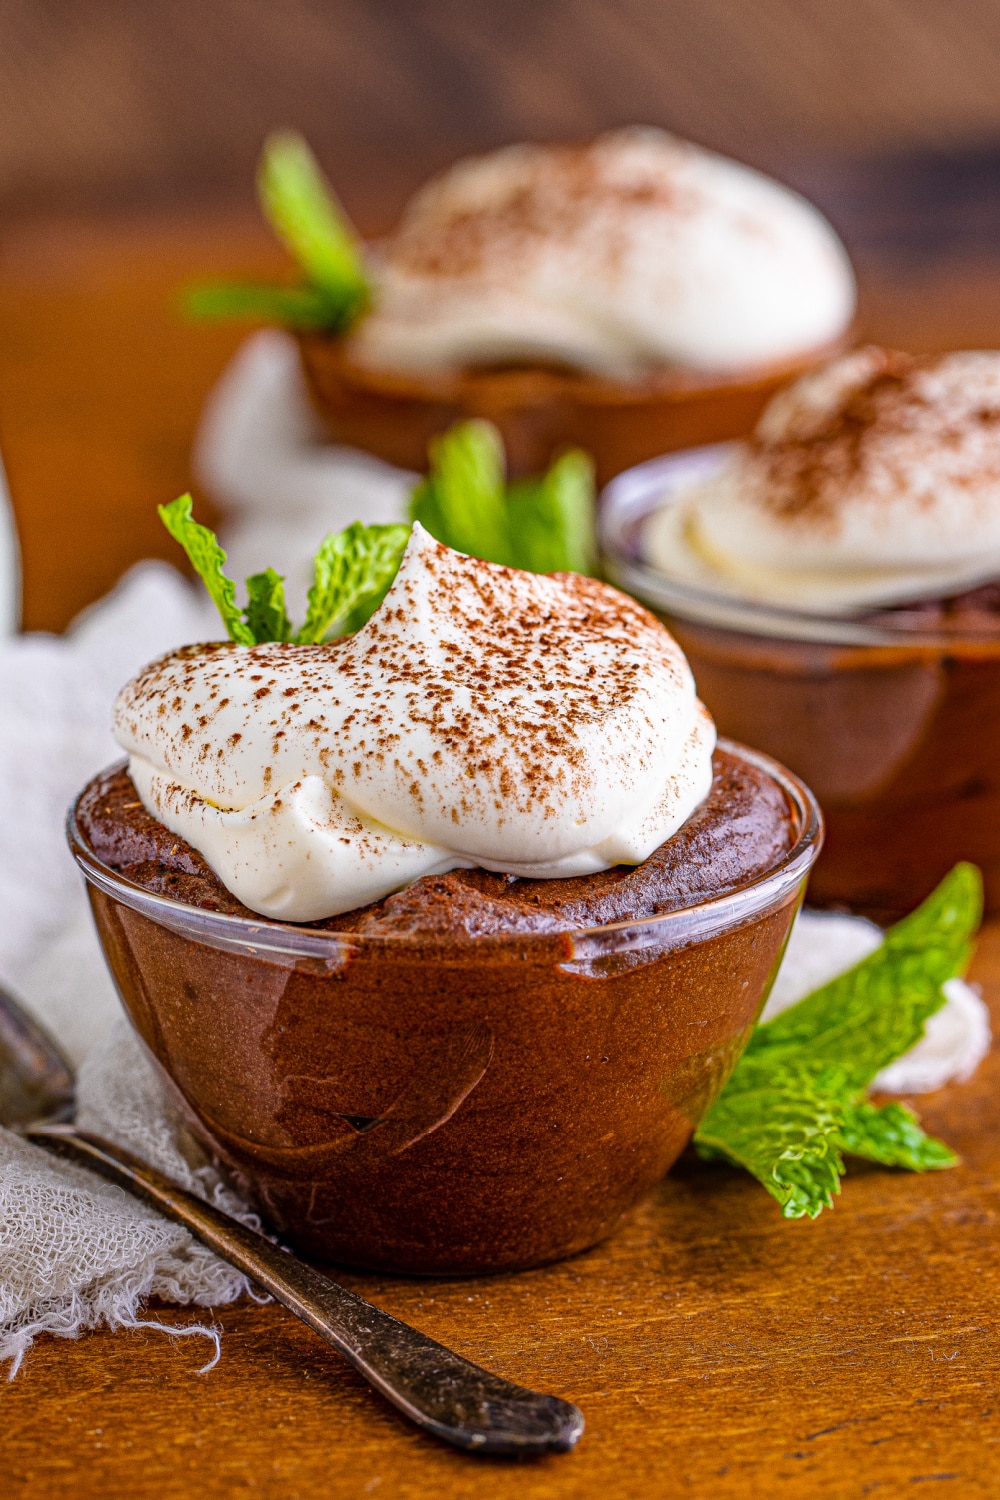 Bowls of Chocolate Mousse topped with whipped cream.